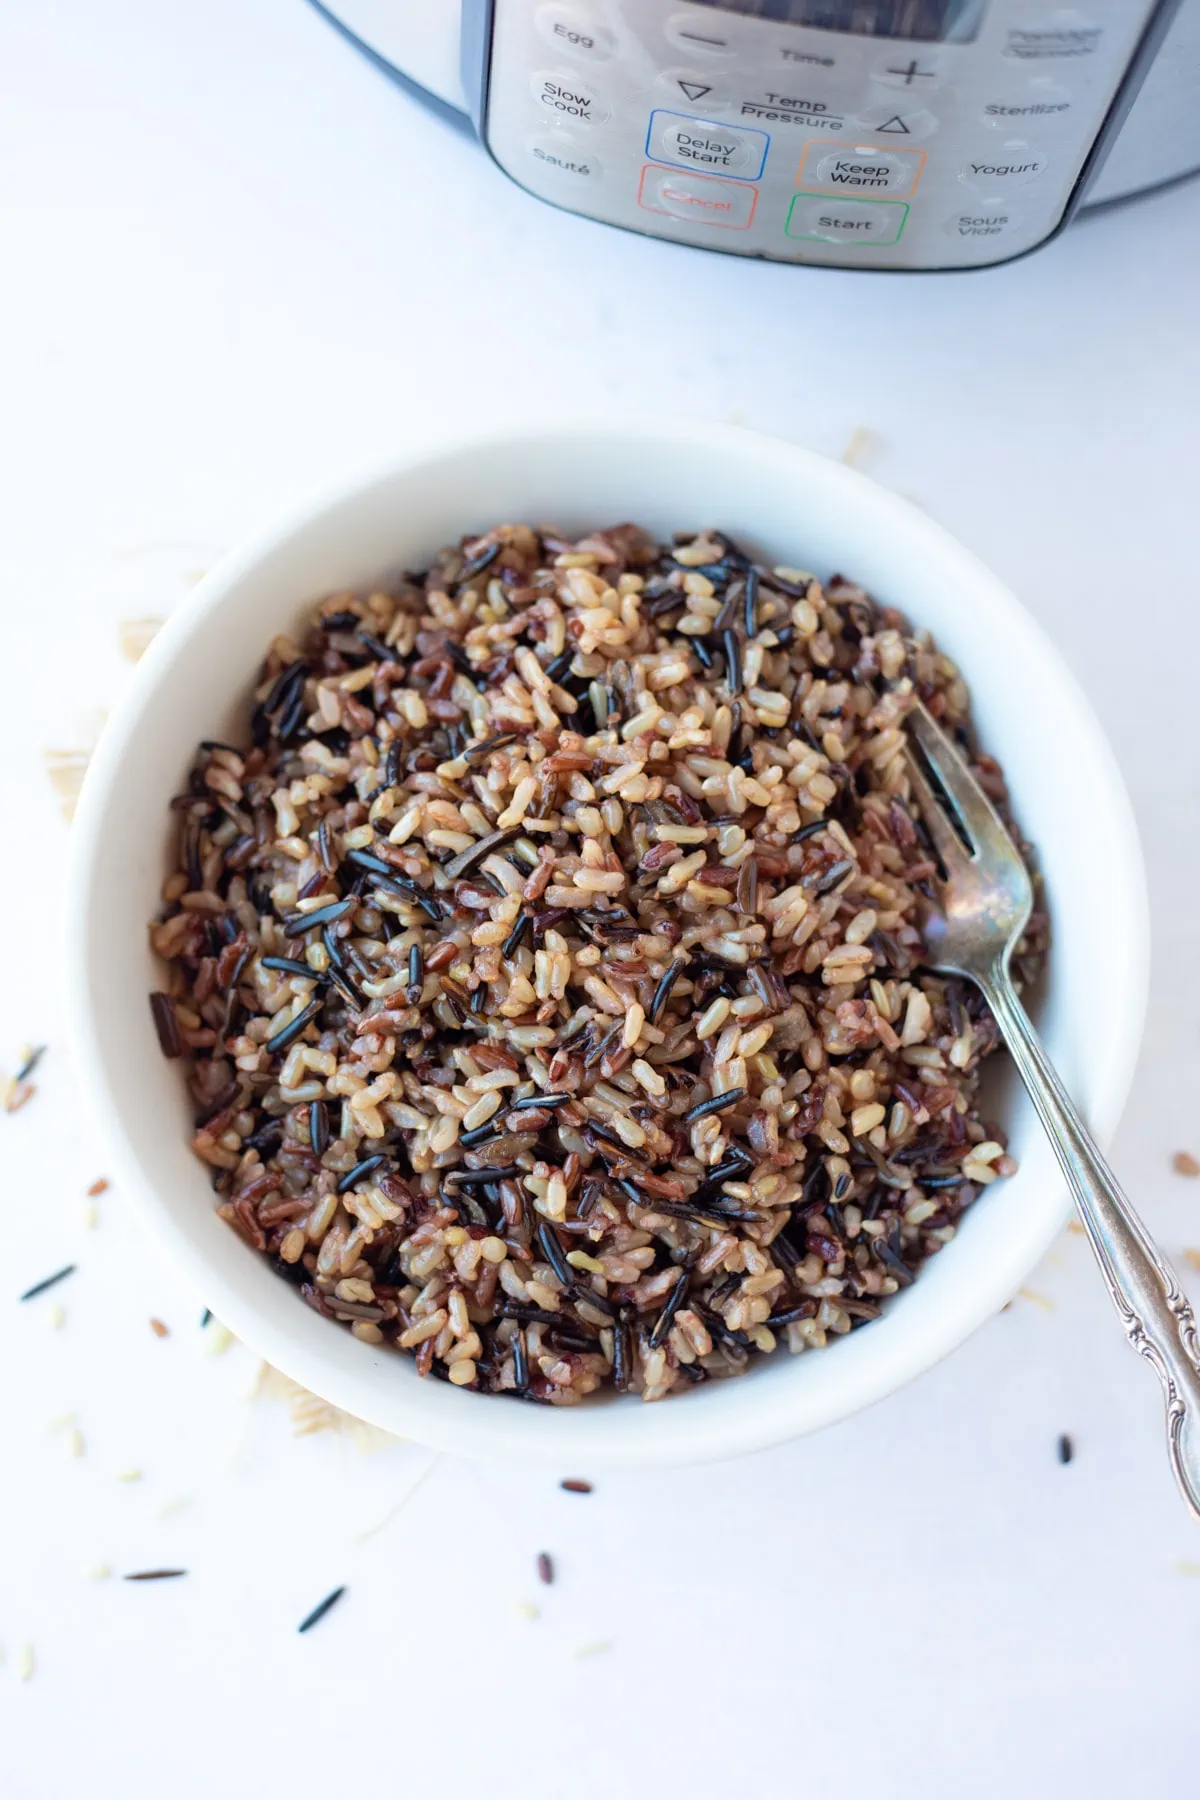 Perfectly cooked Wild rice blend in a bowl in front of the instant pot 